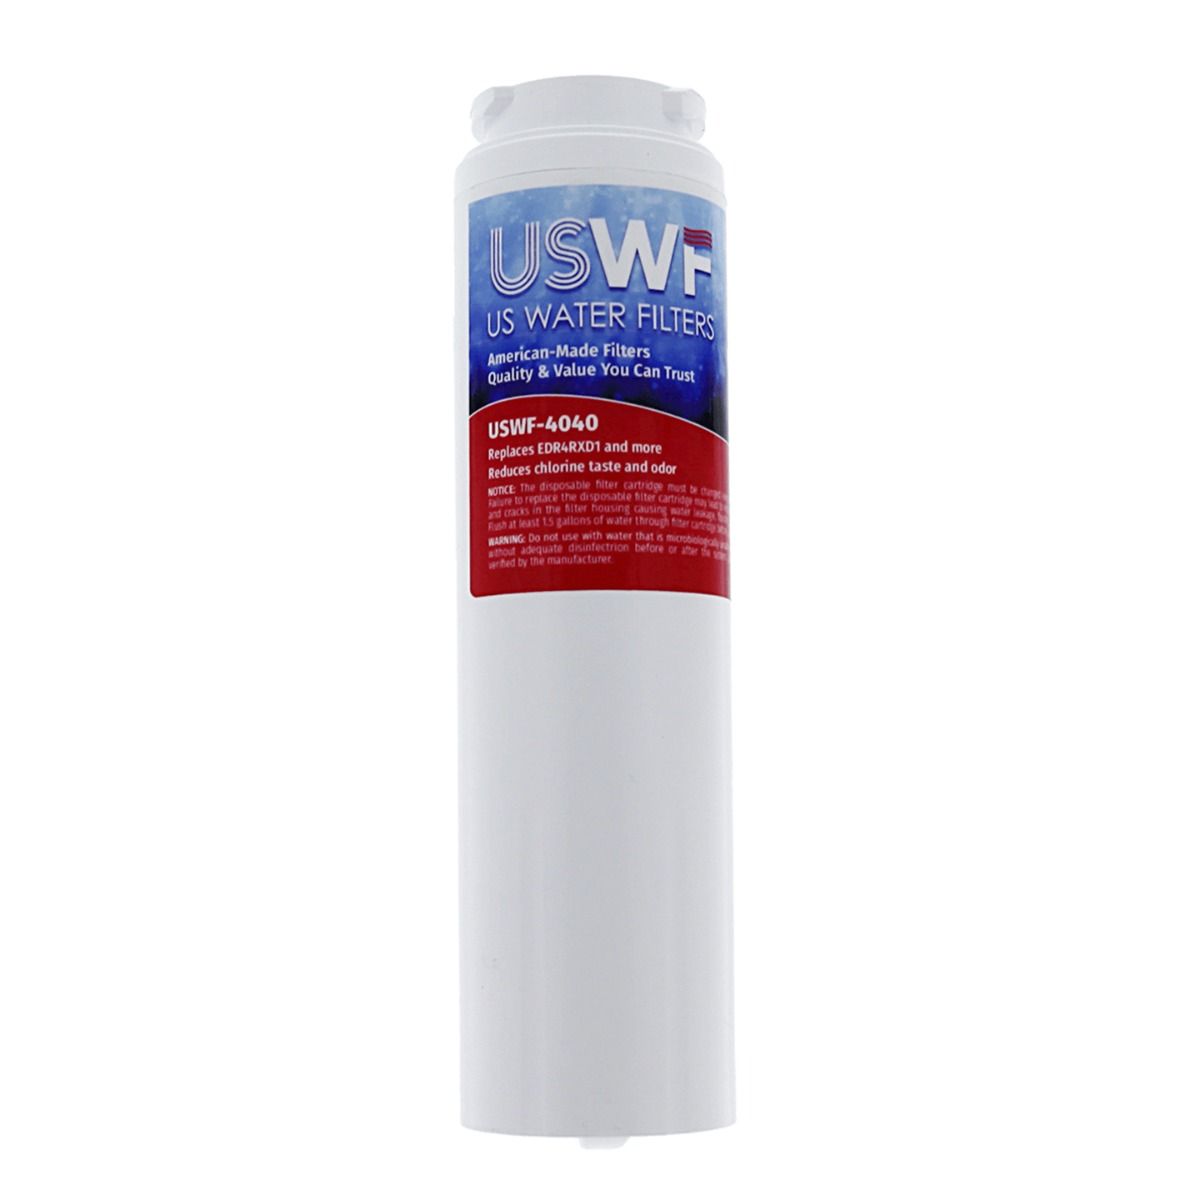 EDR4RXD1 EveryDrop UKF8001 Maytag Comparable Refrigerator Water Filter Replacement By USWF